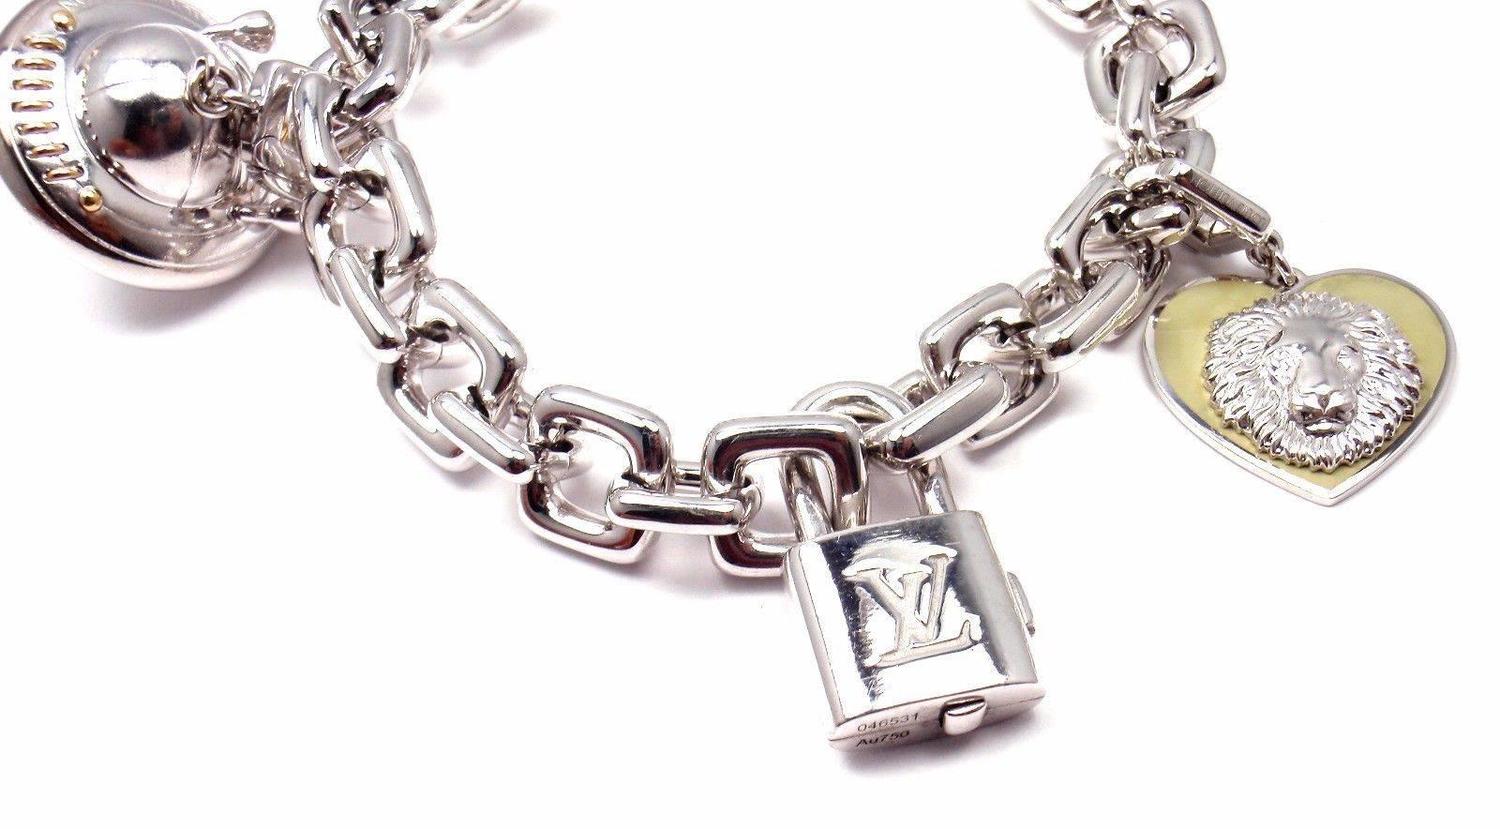 Louis Vuitton Charm Link White Gold Bracelet With Charms For Sale at 1stdibs